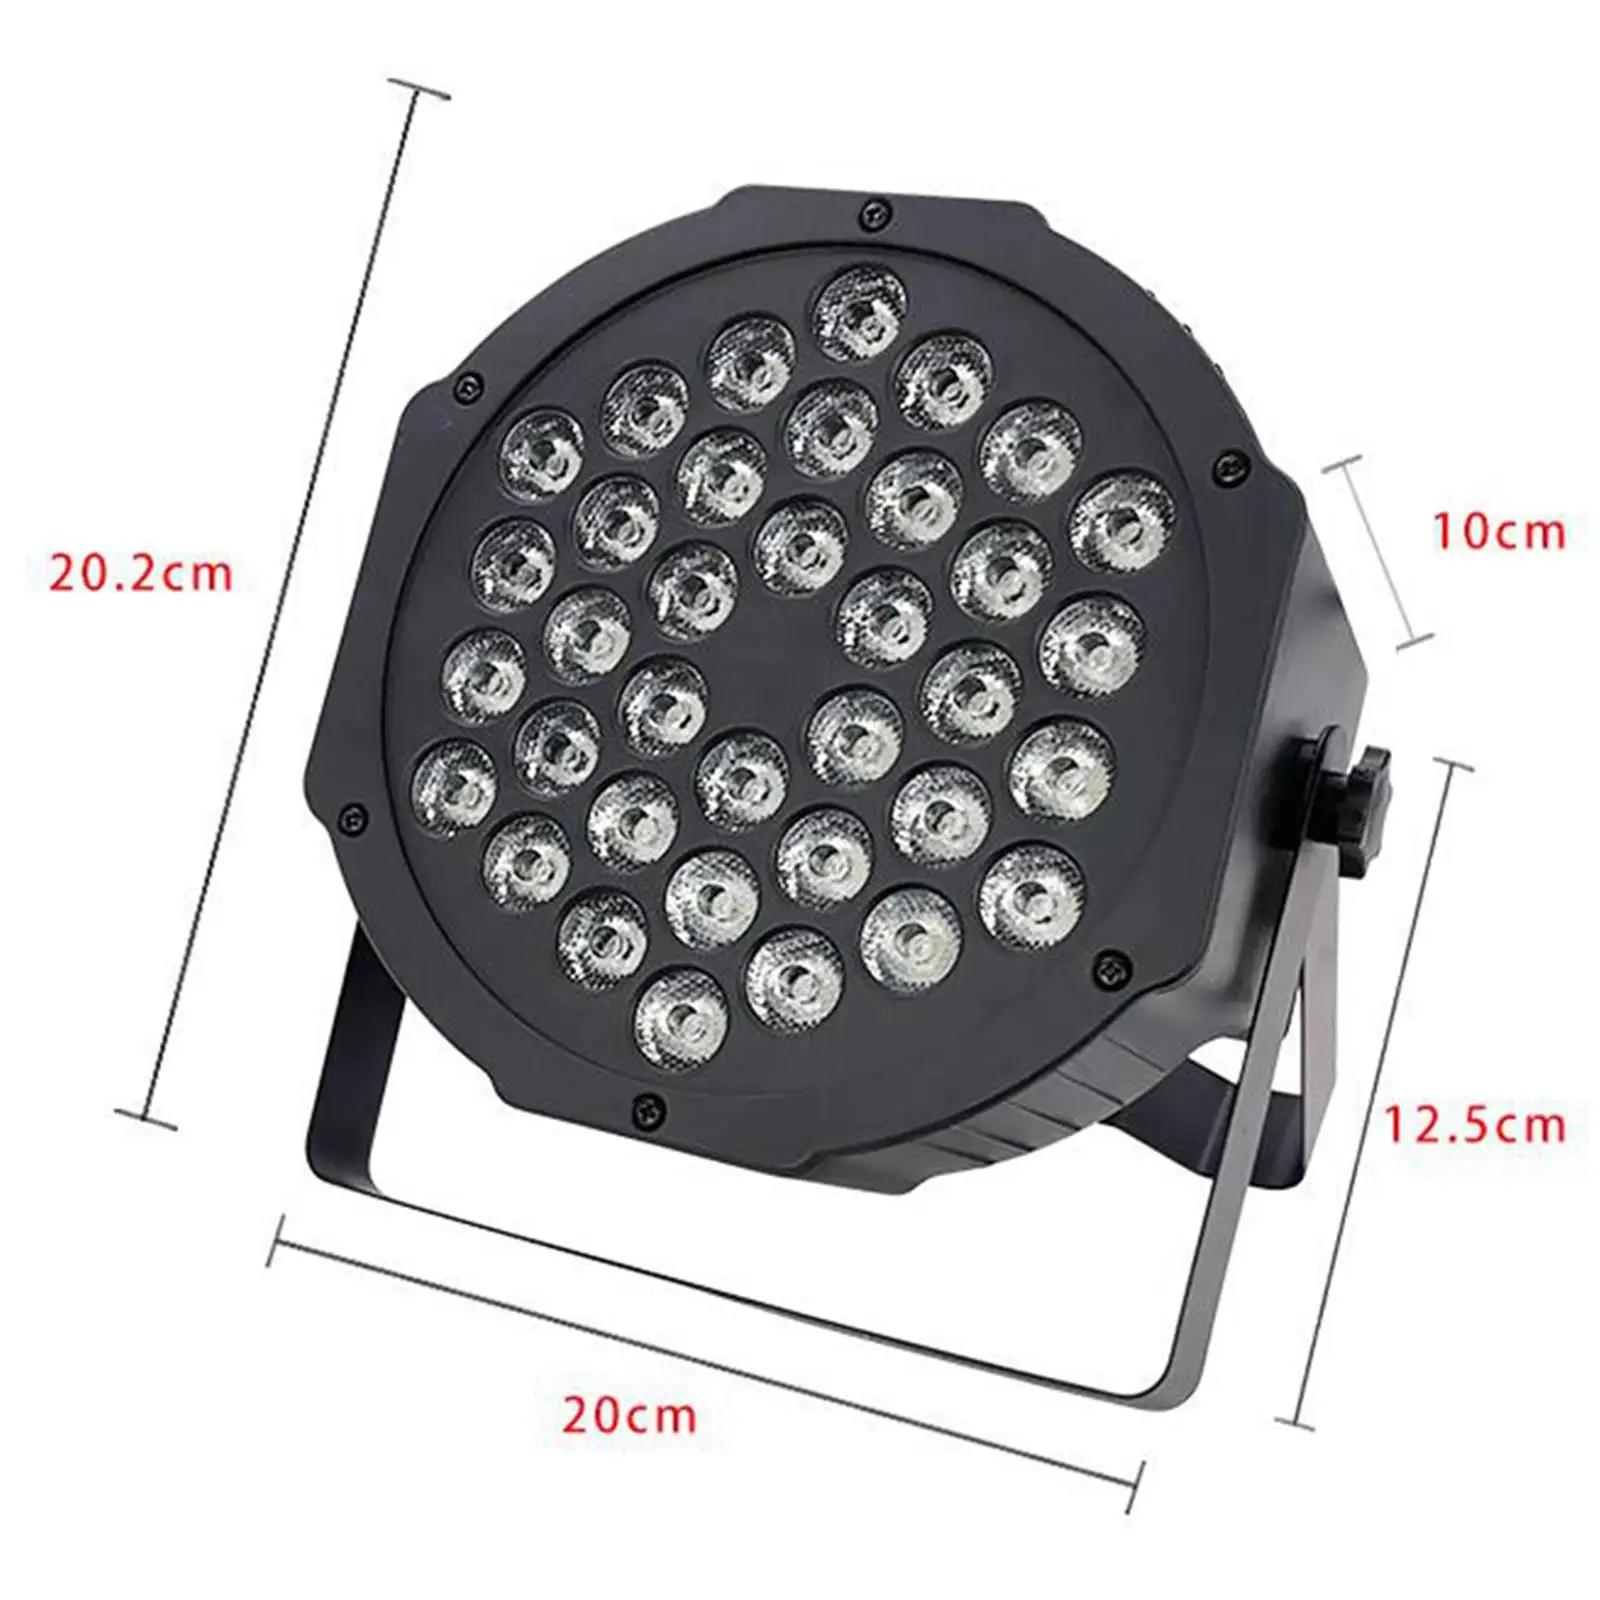 stage Lamp Super Bright Portable Professional Novelty Waterproof Remote Control for Bedroom Home KTV Party concert